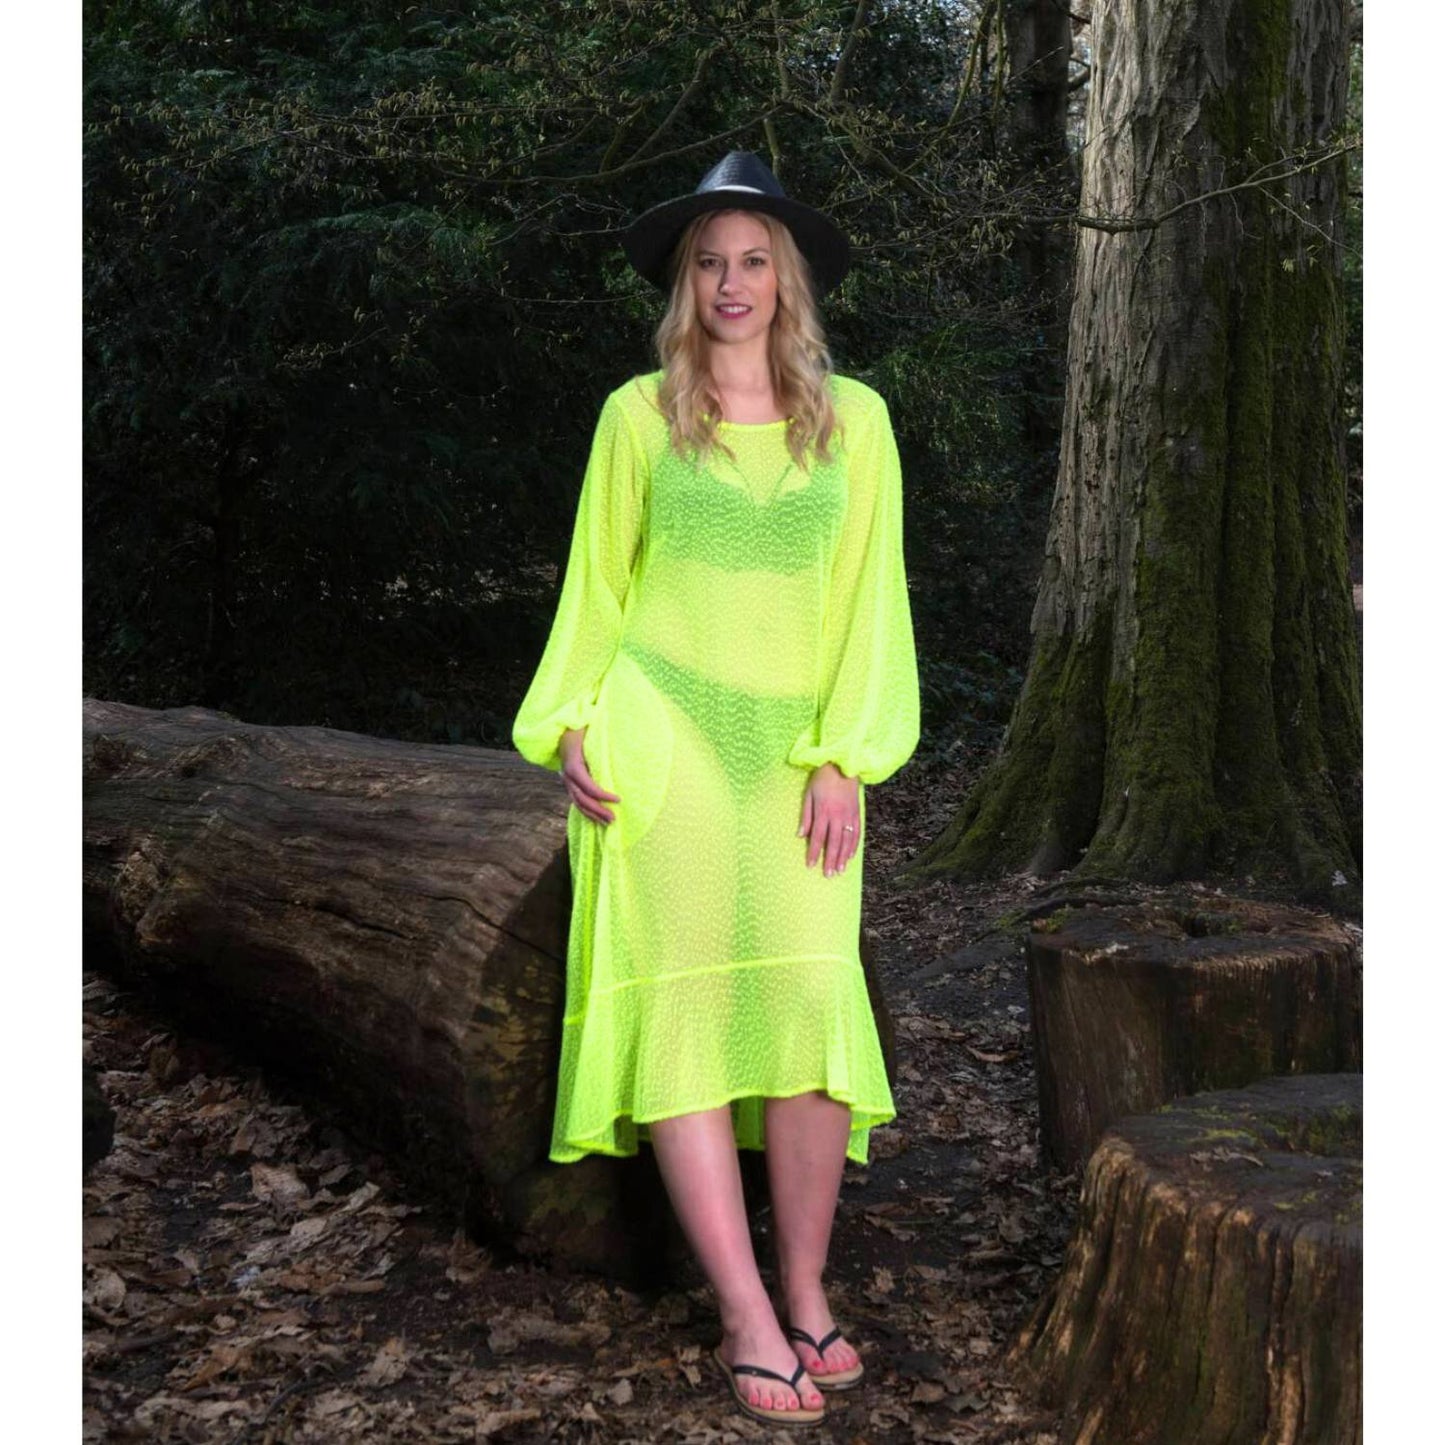 Women's Aphrodite Neon Lime Holiday Resort Dress styled with a bikini underneath, paired with a black hat and black flip-flops for a casual look.